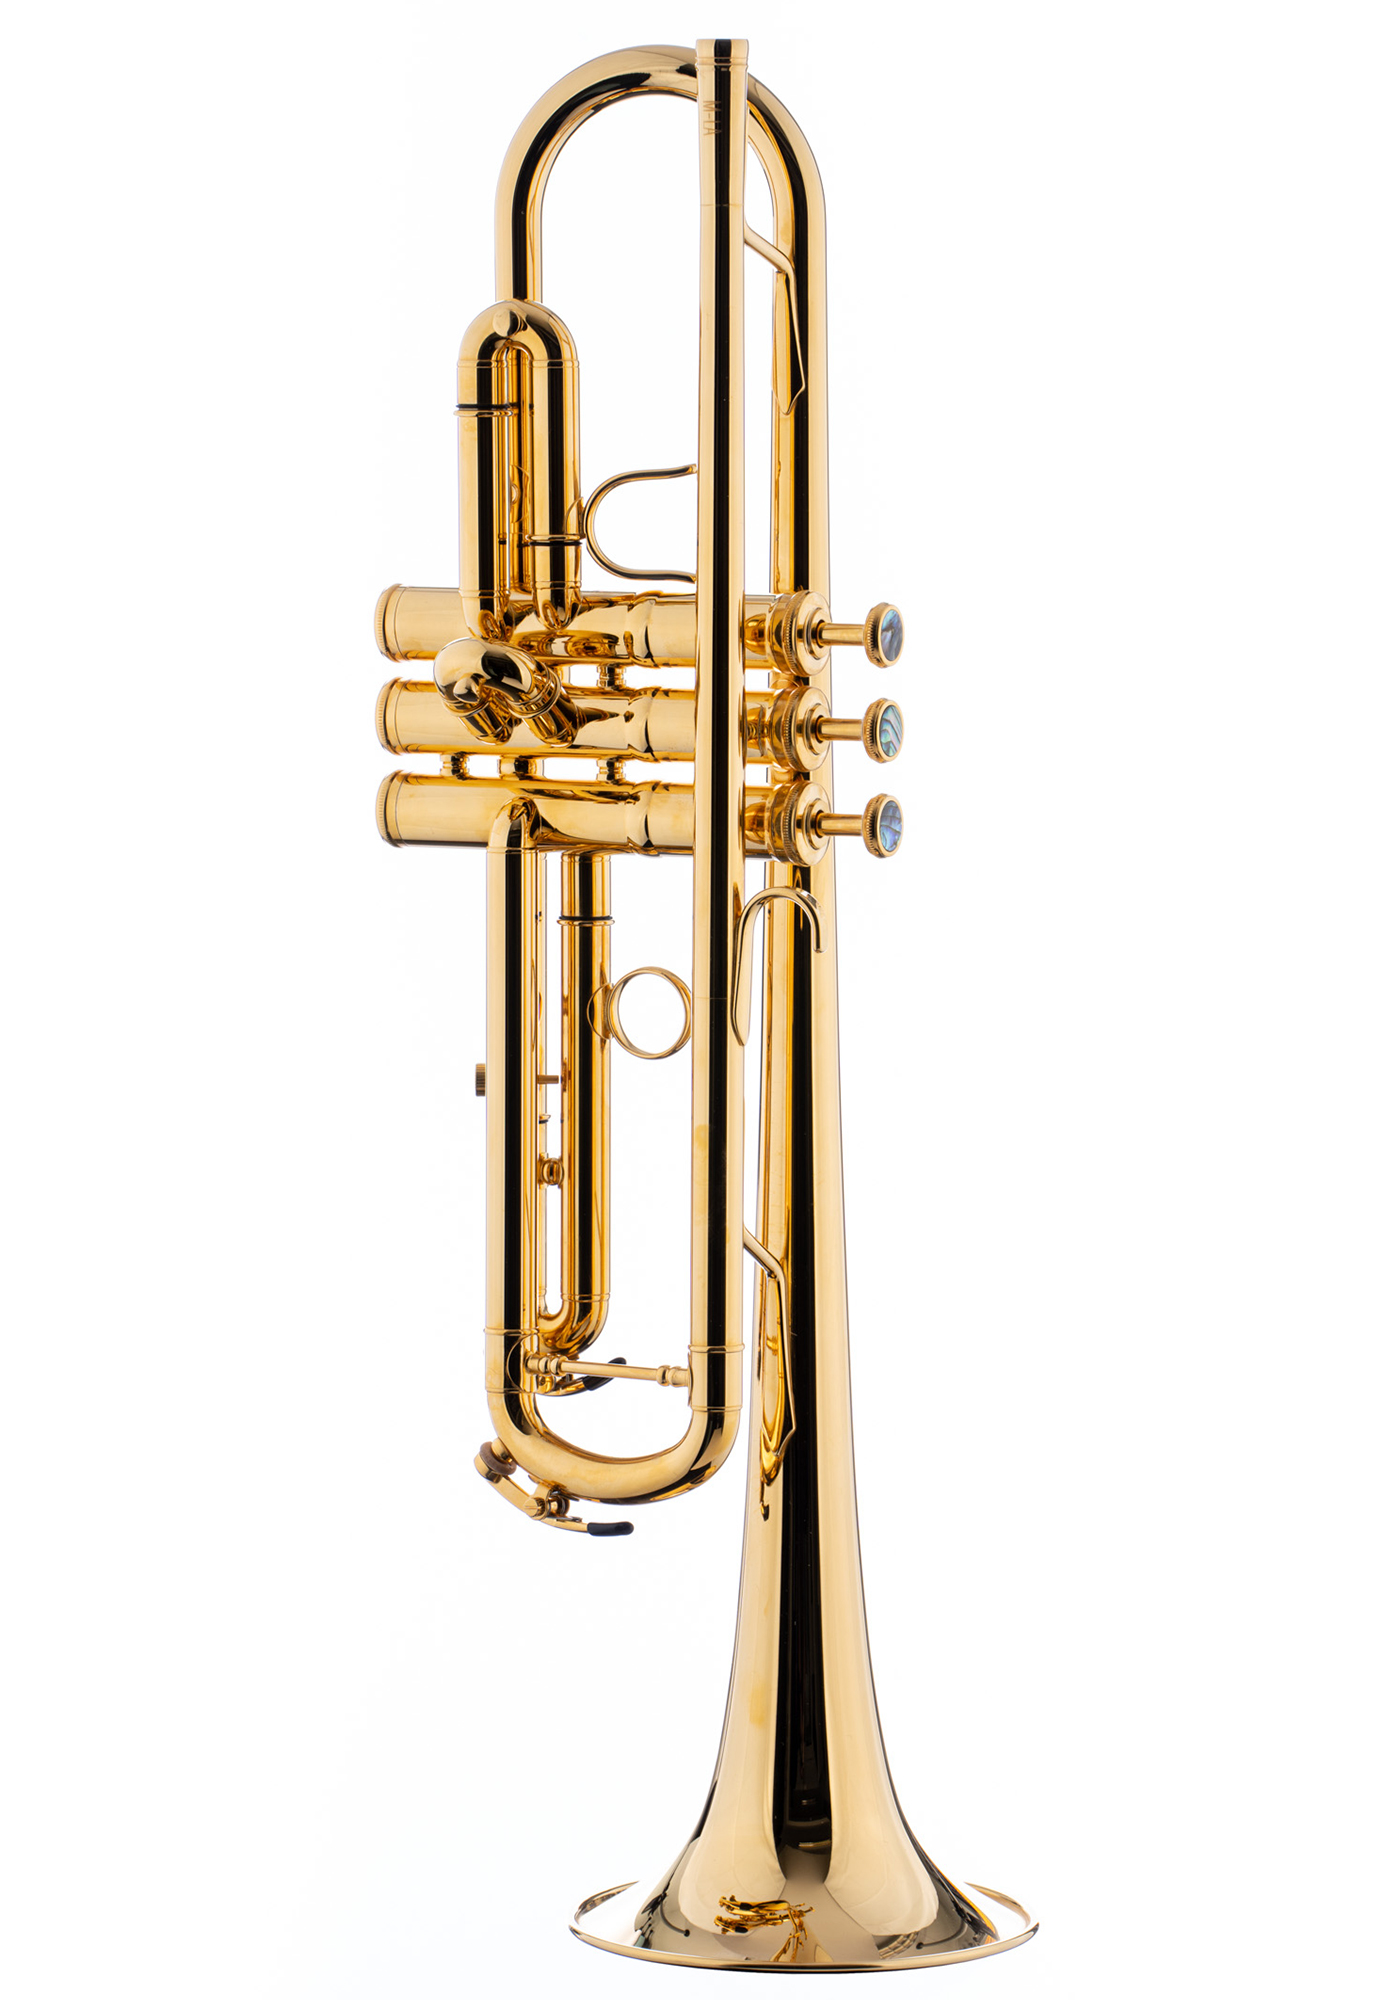 Schagerl Bb-Trumpet "1961" B2N gold plated